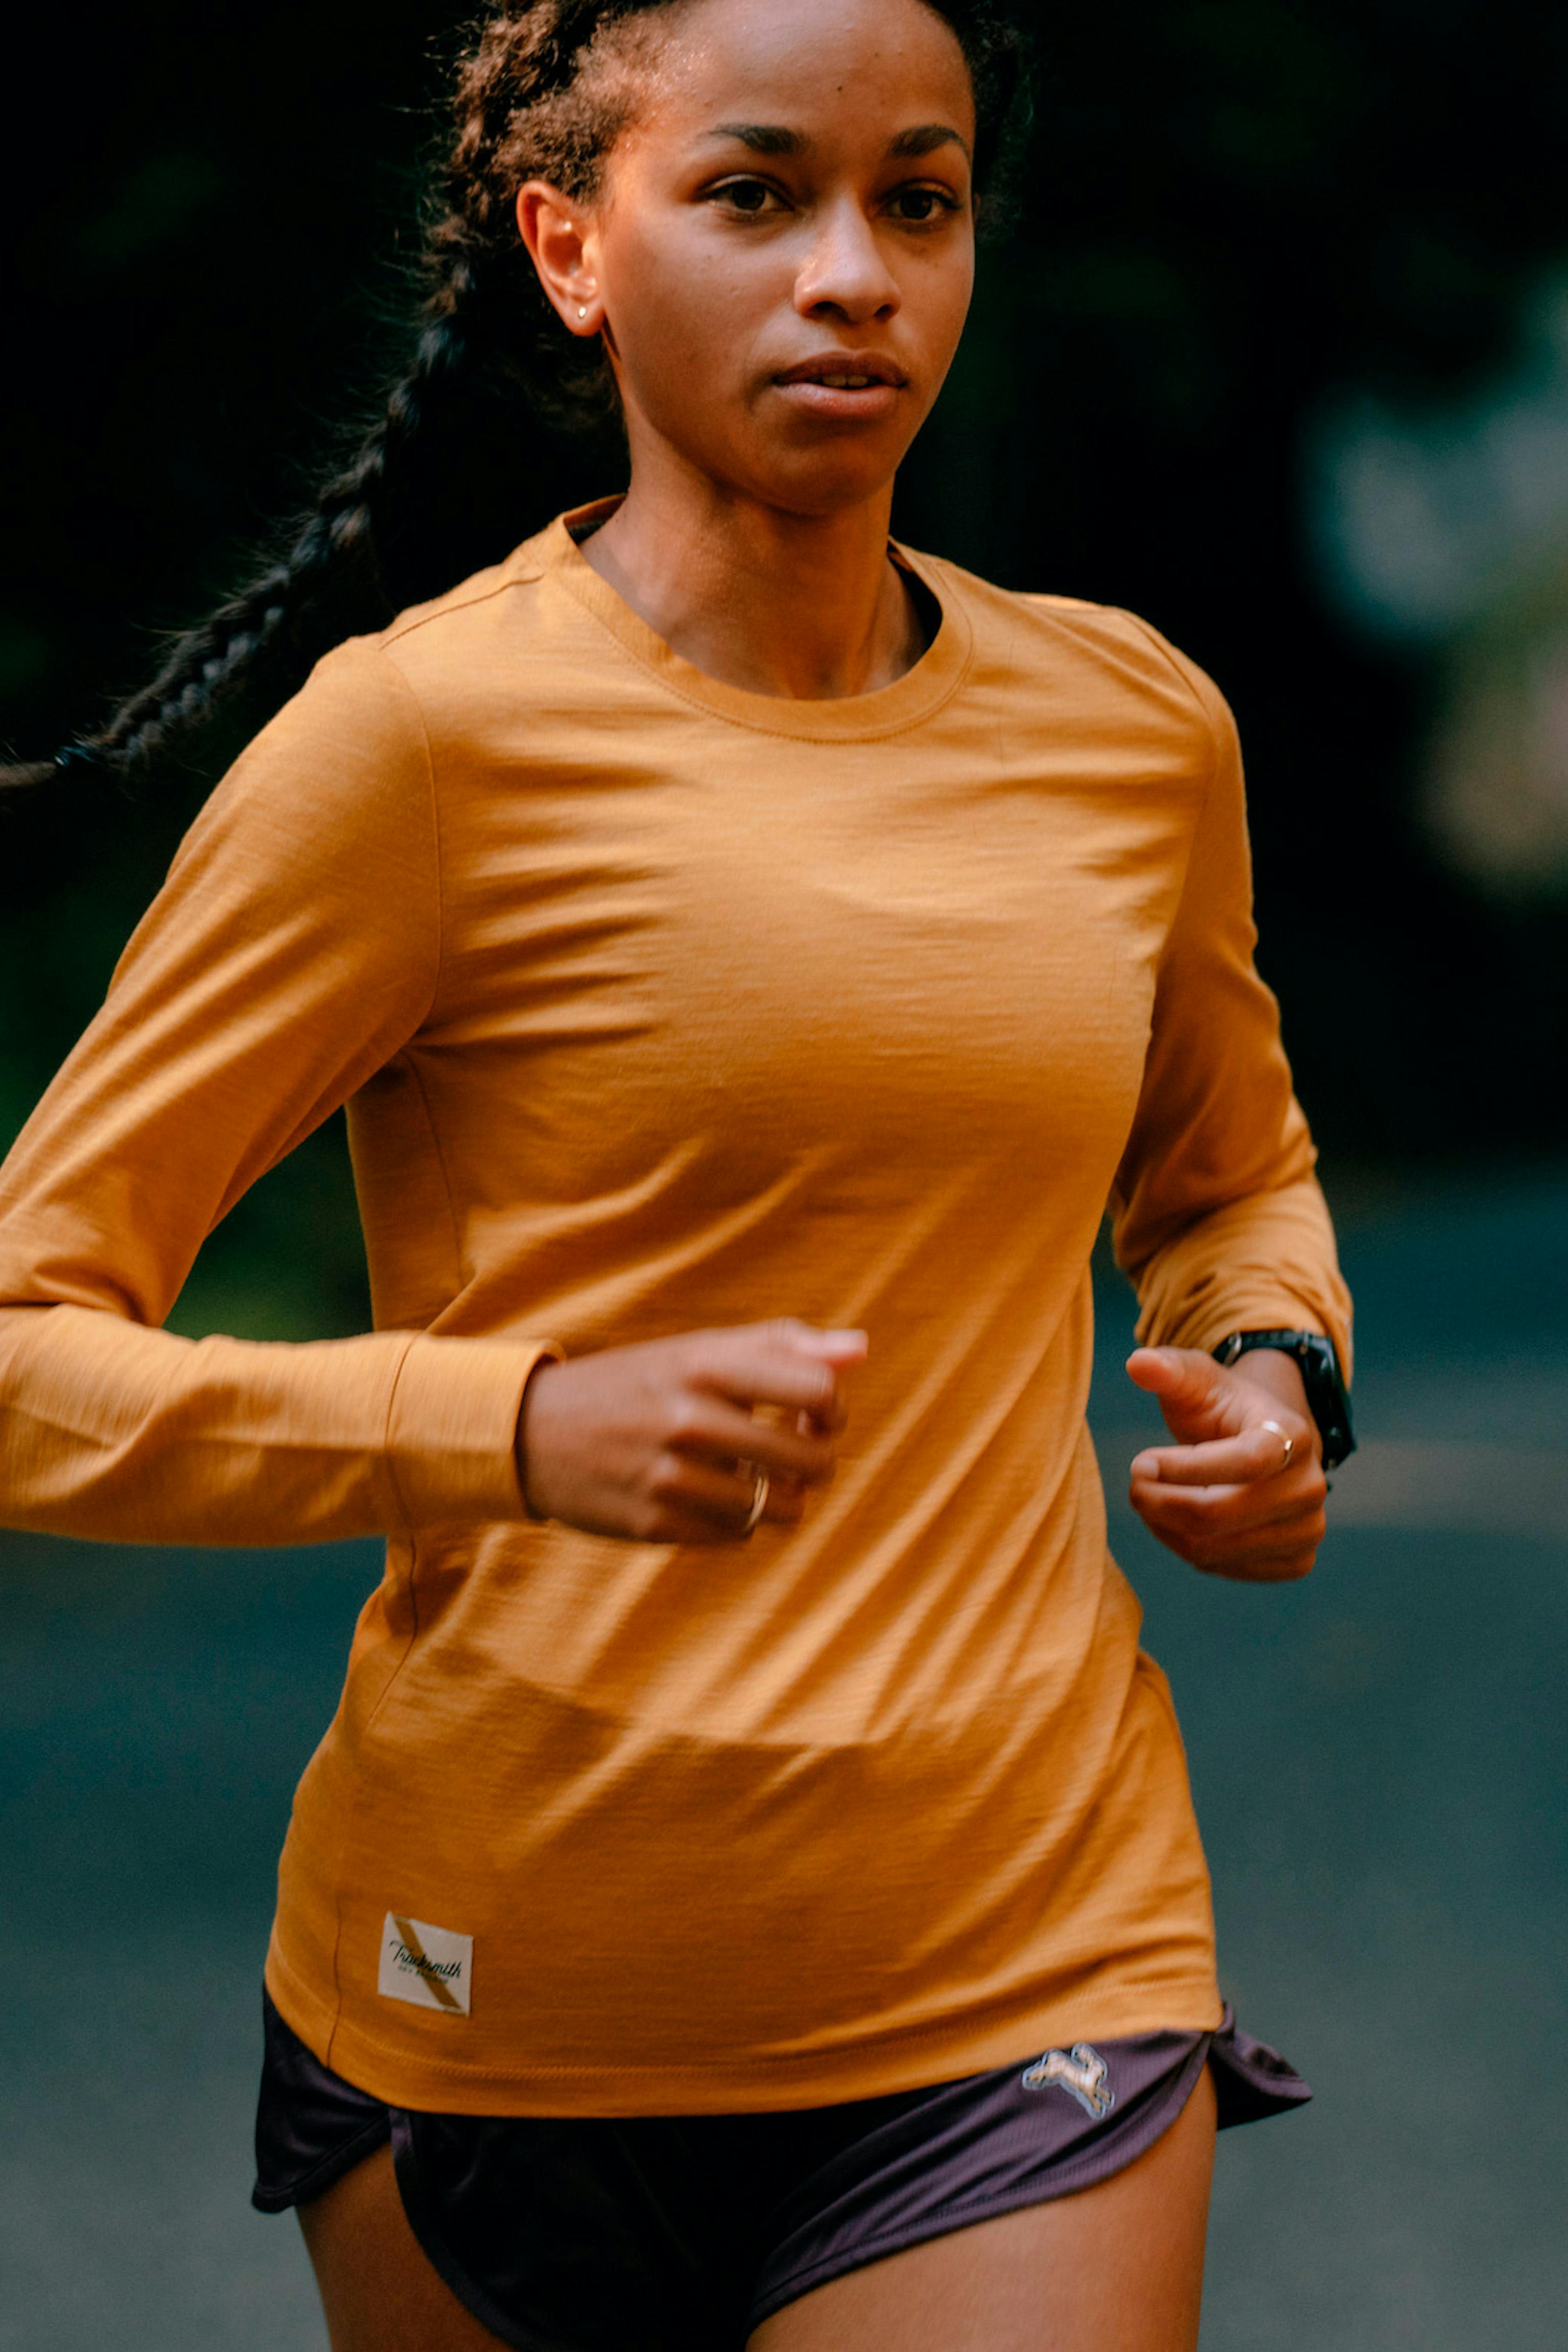 Tracksmith's New Spring Collection Includes Base Layers, Tights